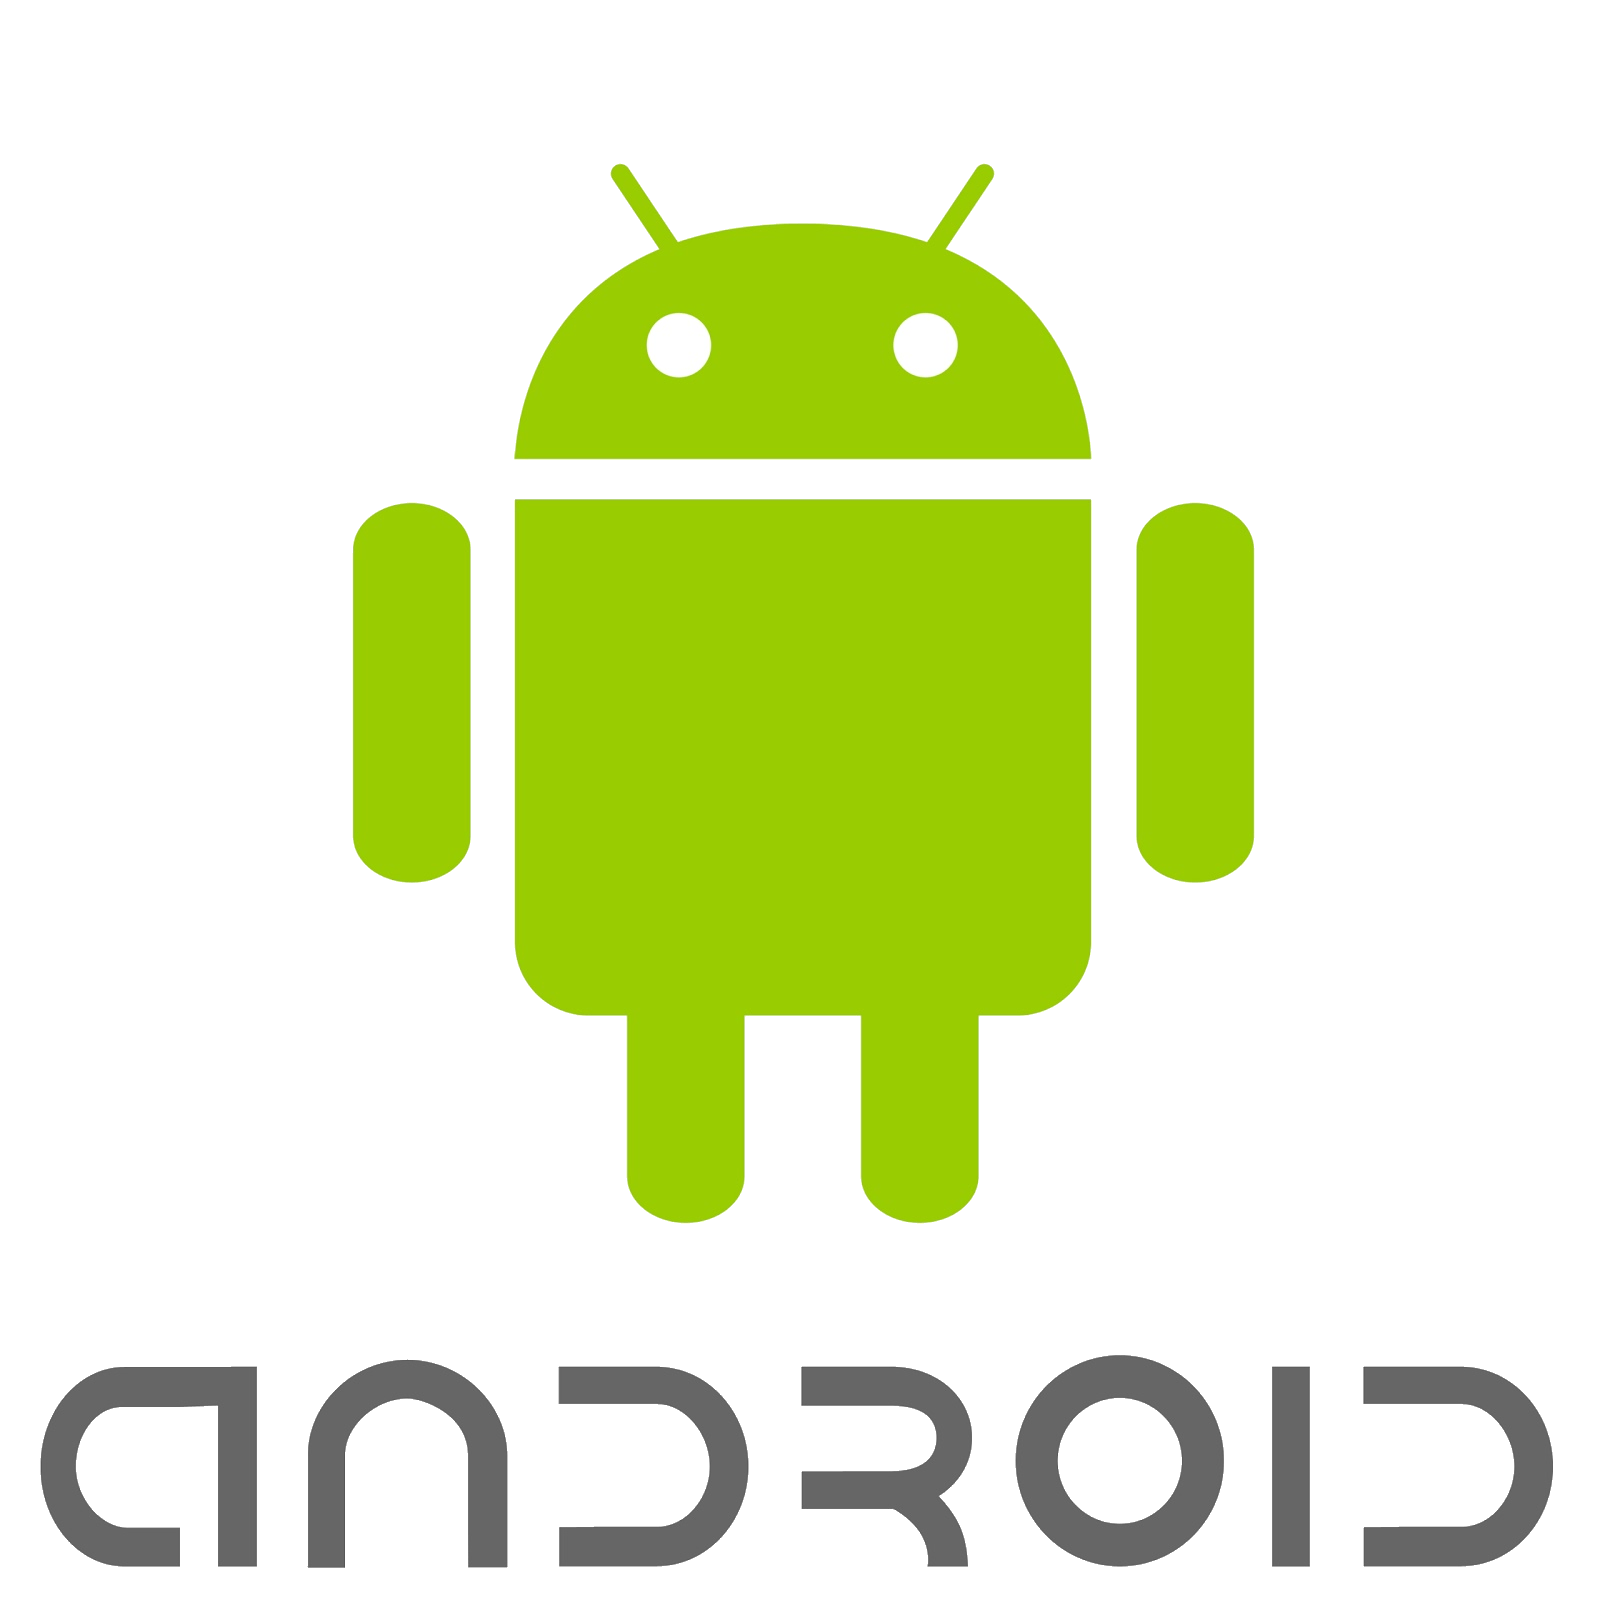 Native Android Mobile apps developers